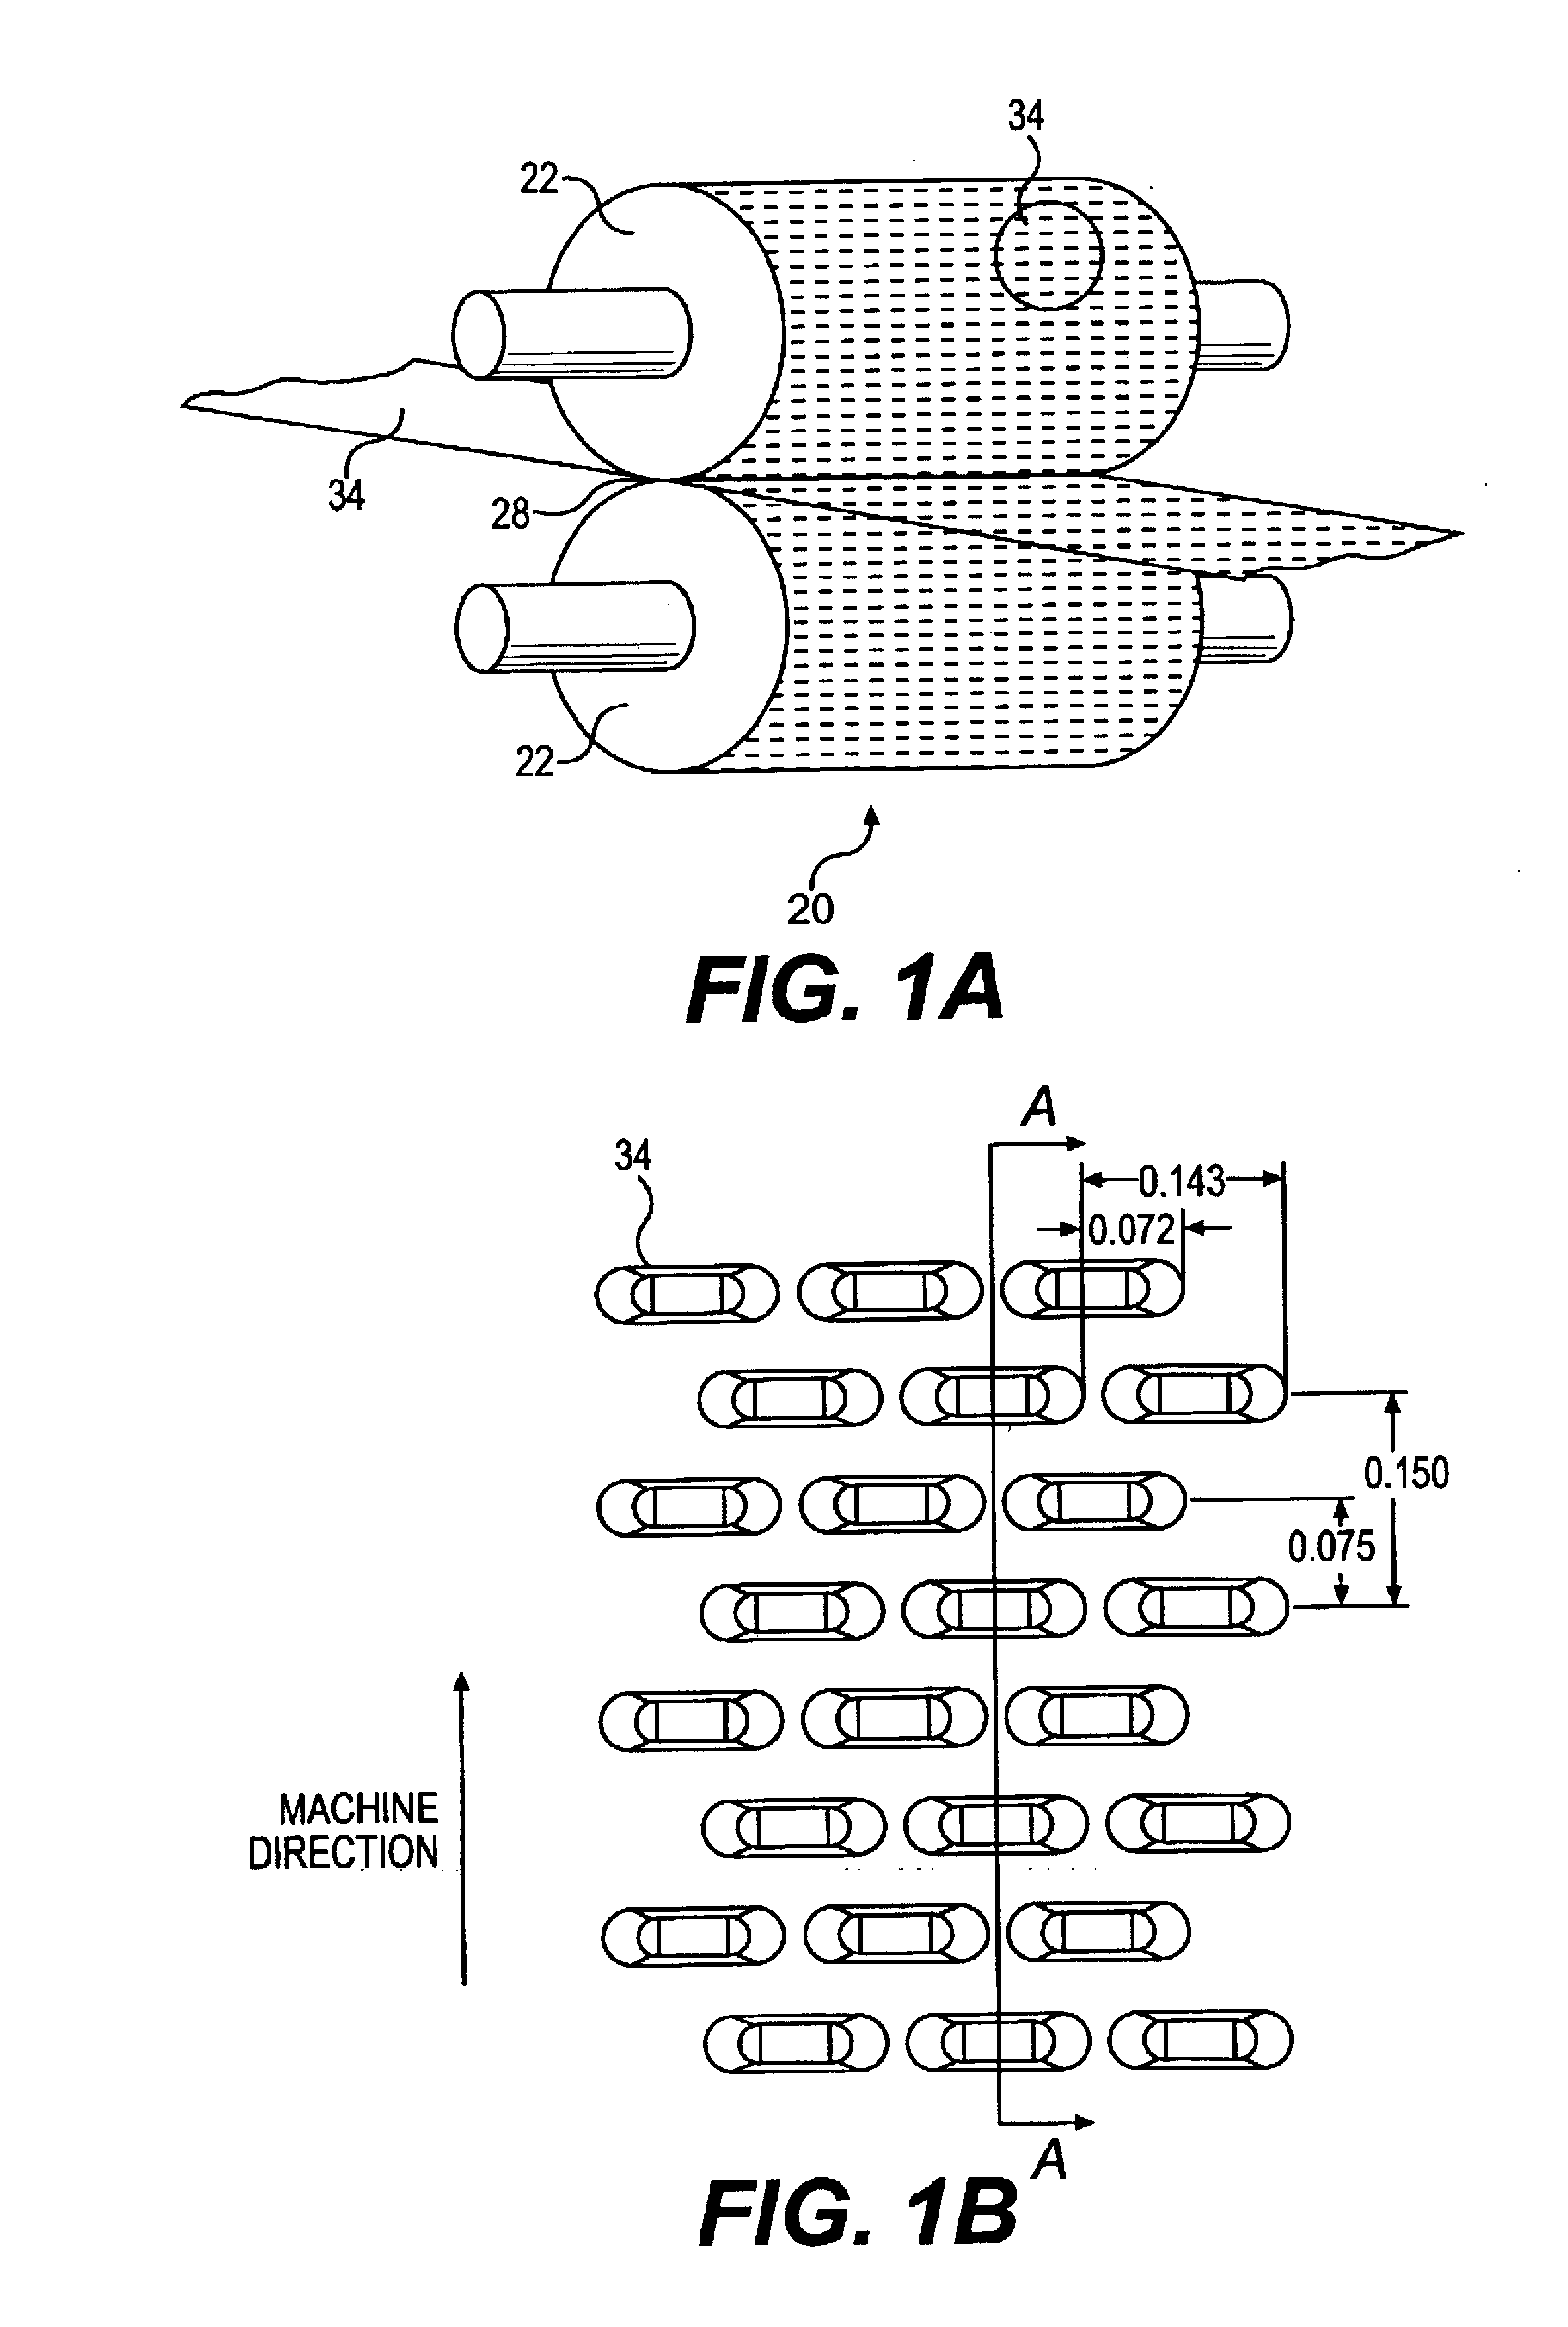 Apparatus and method for degrading a web in the machine direction while preserving cross-machine direction strength